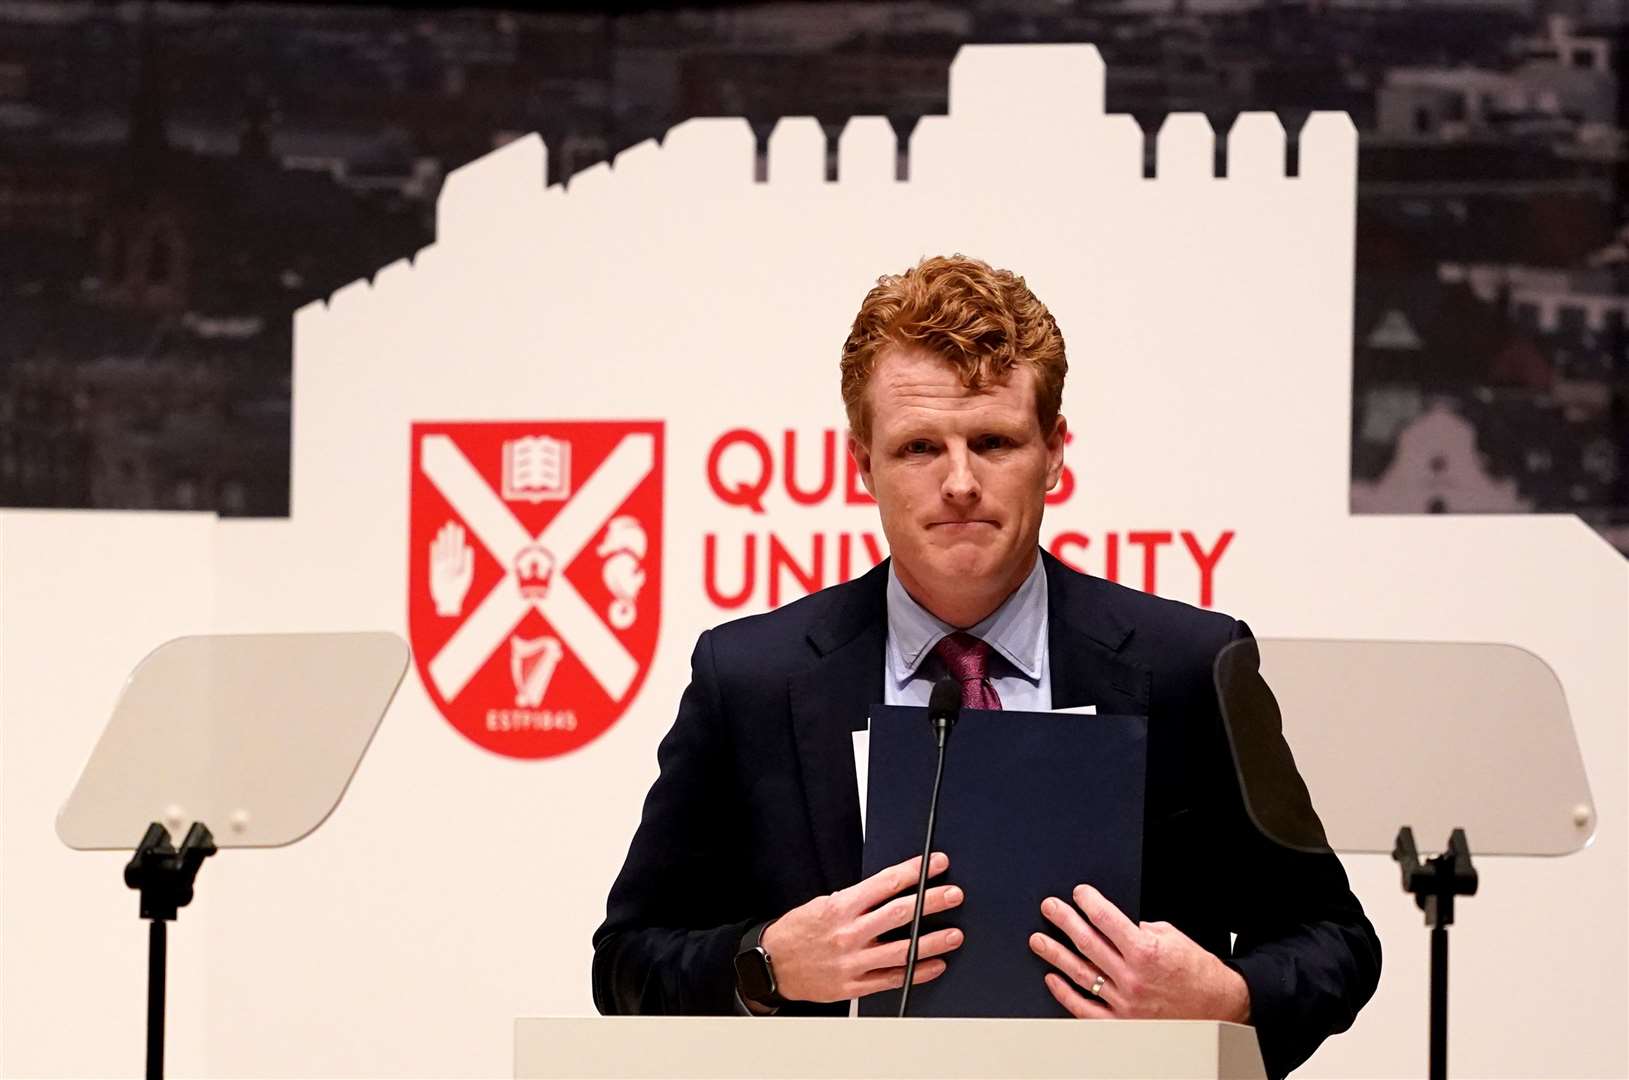 Congressman Joe Kennedy III speaking during the international conference at Queen’s University Belfast (Brian Lawless/PA)